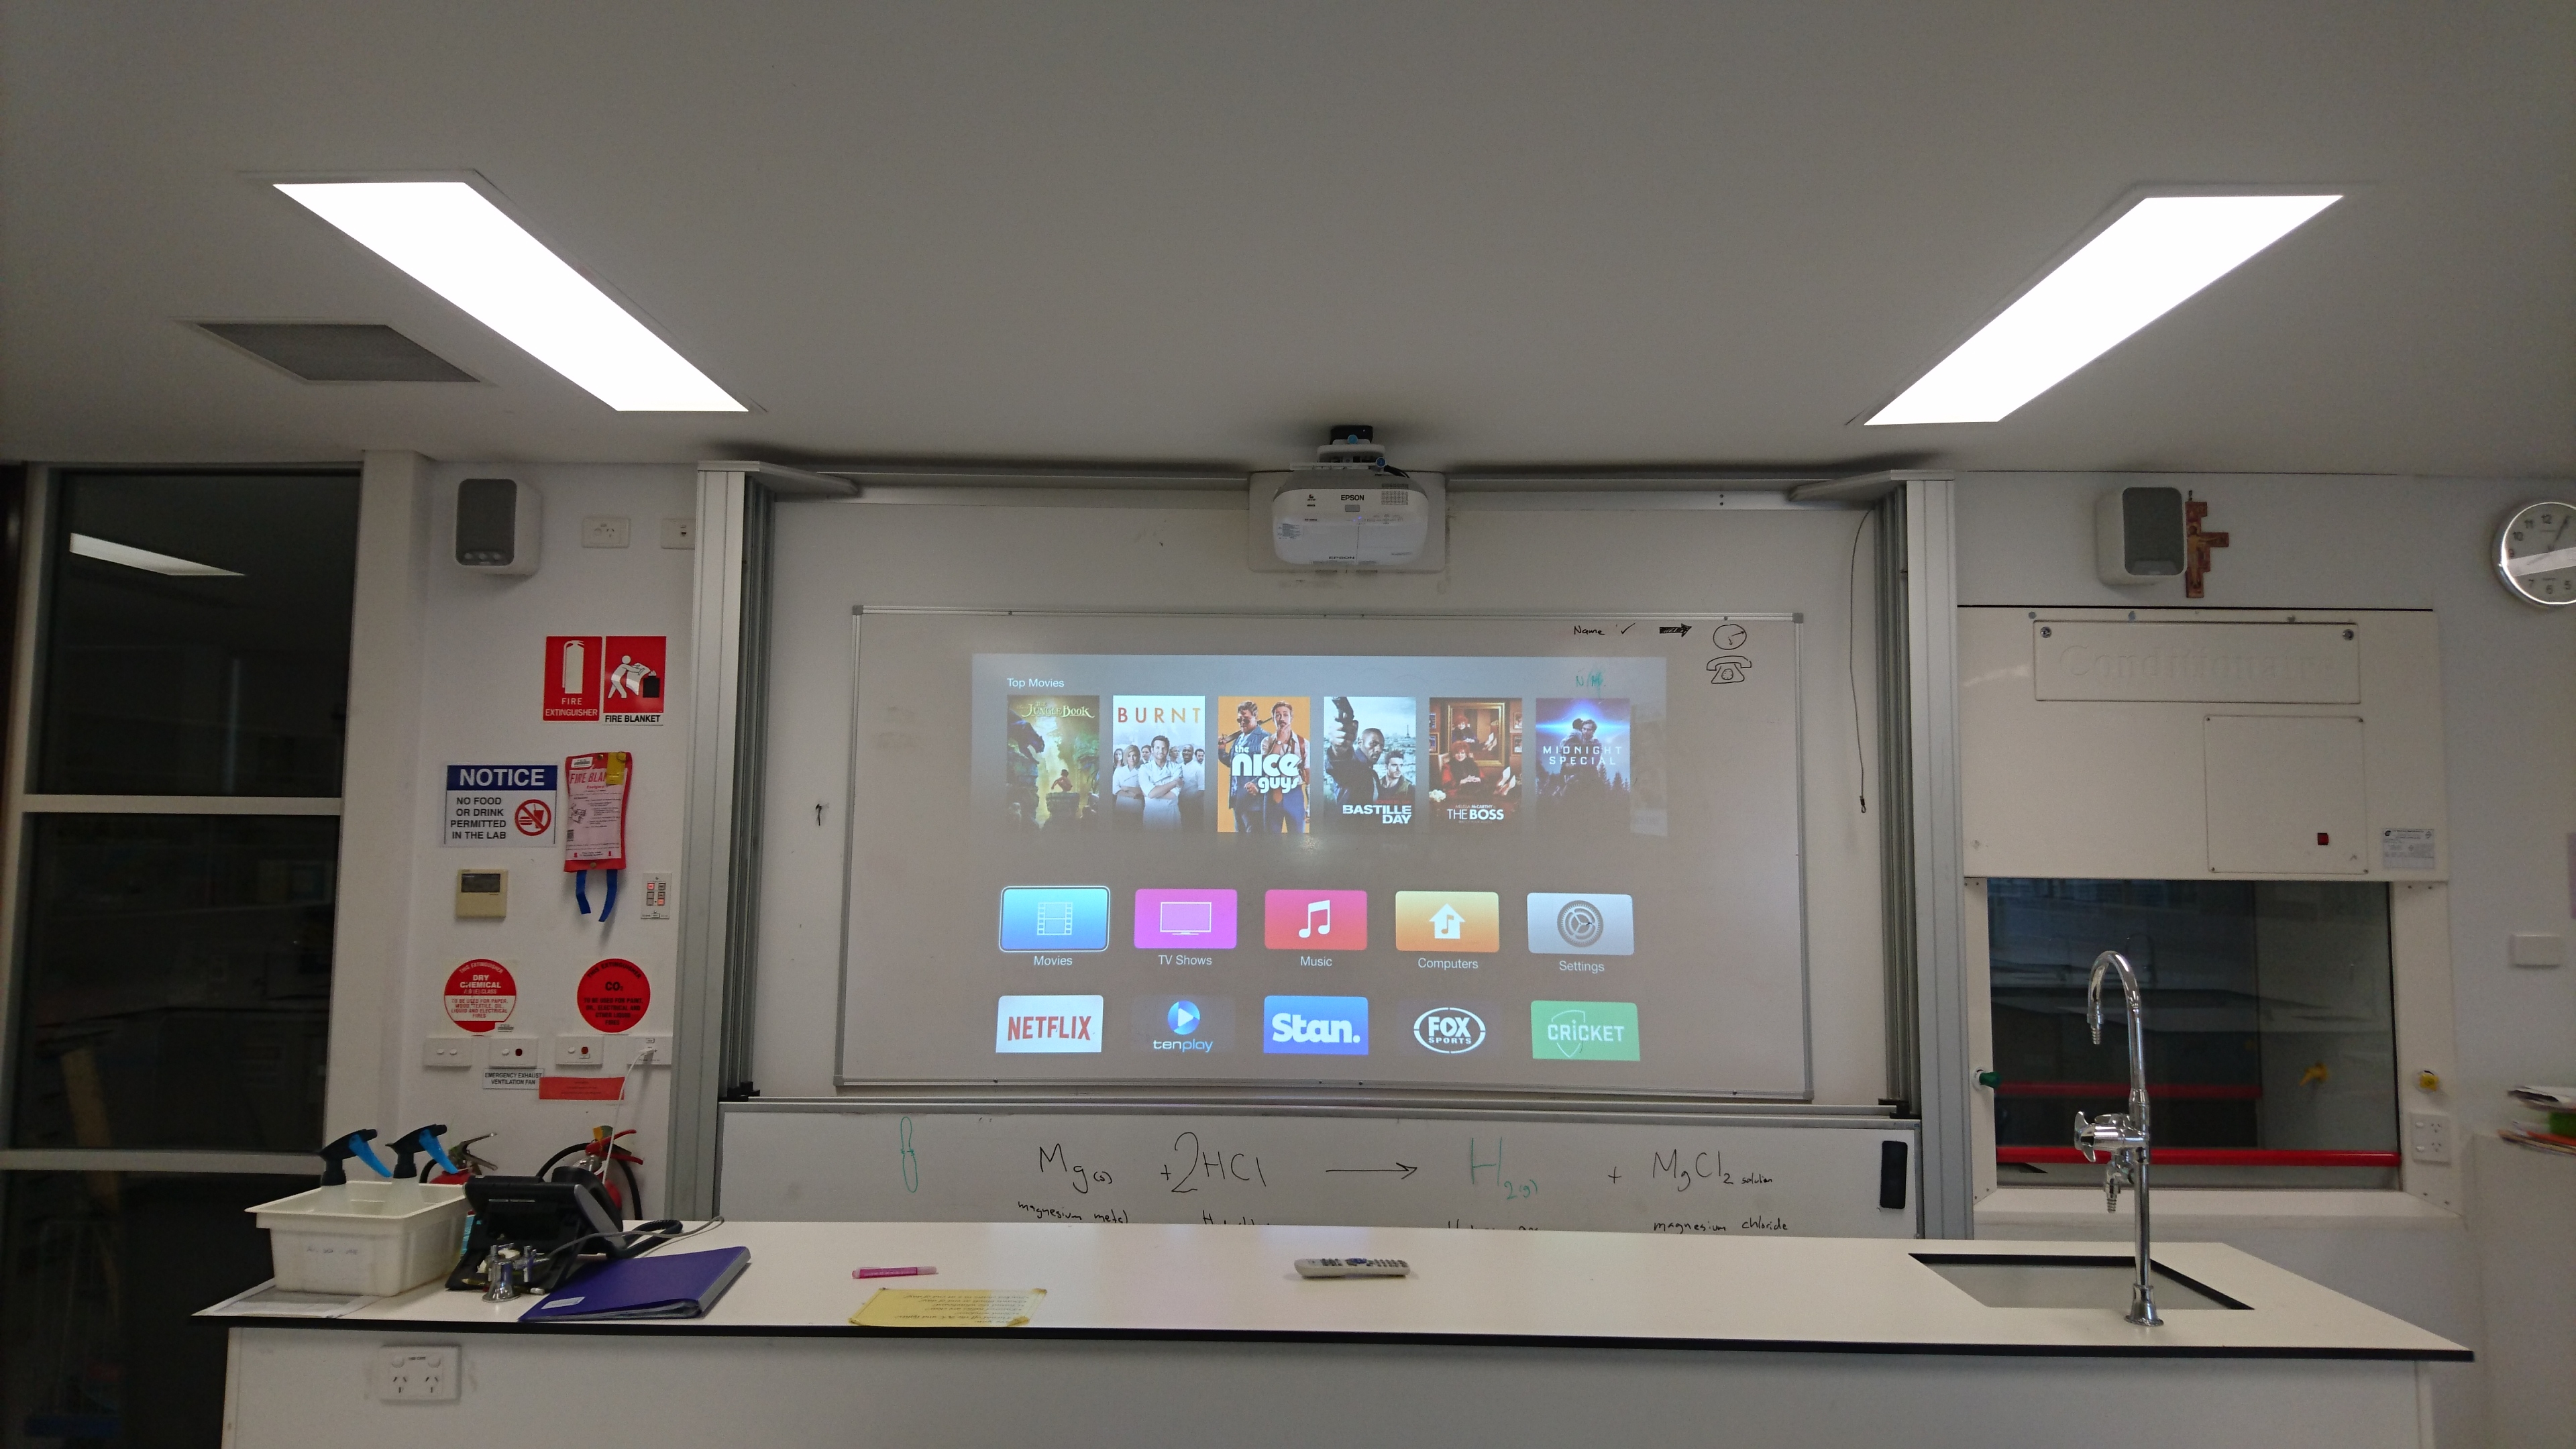 Epson eb-585w projector for science classroom